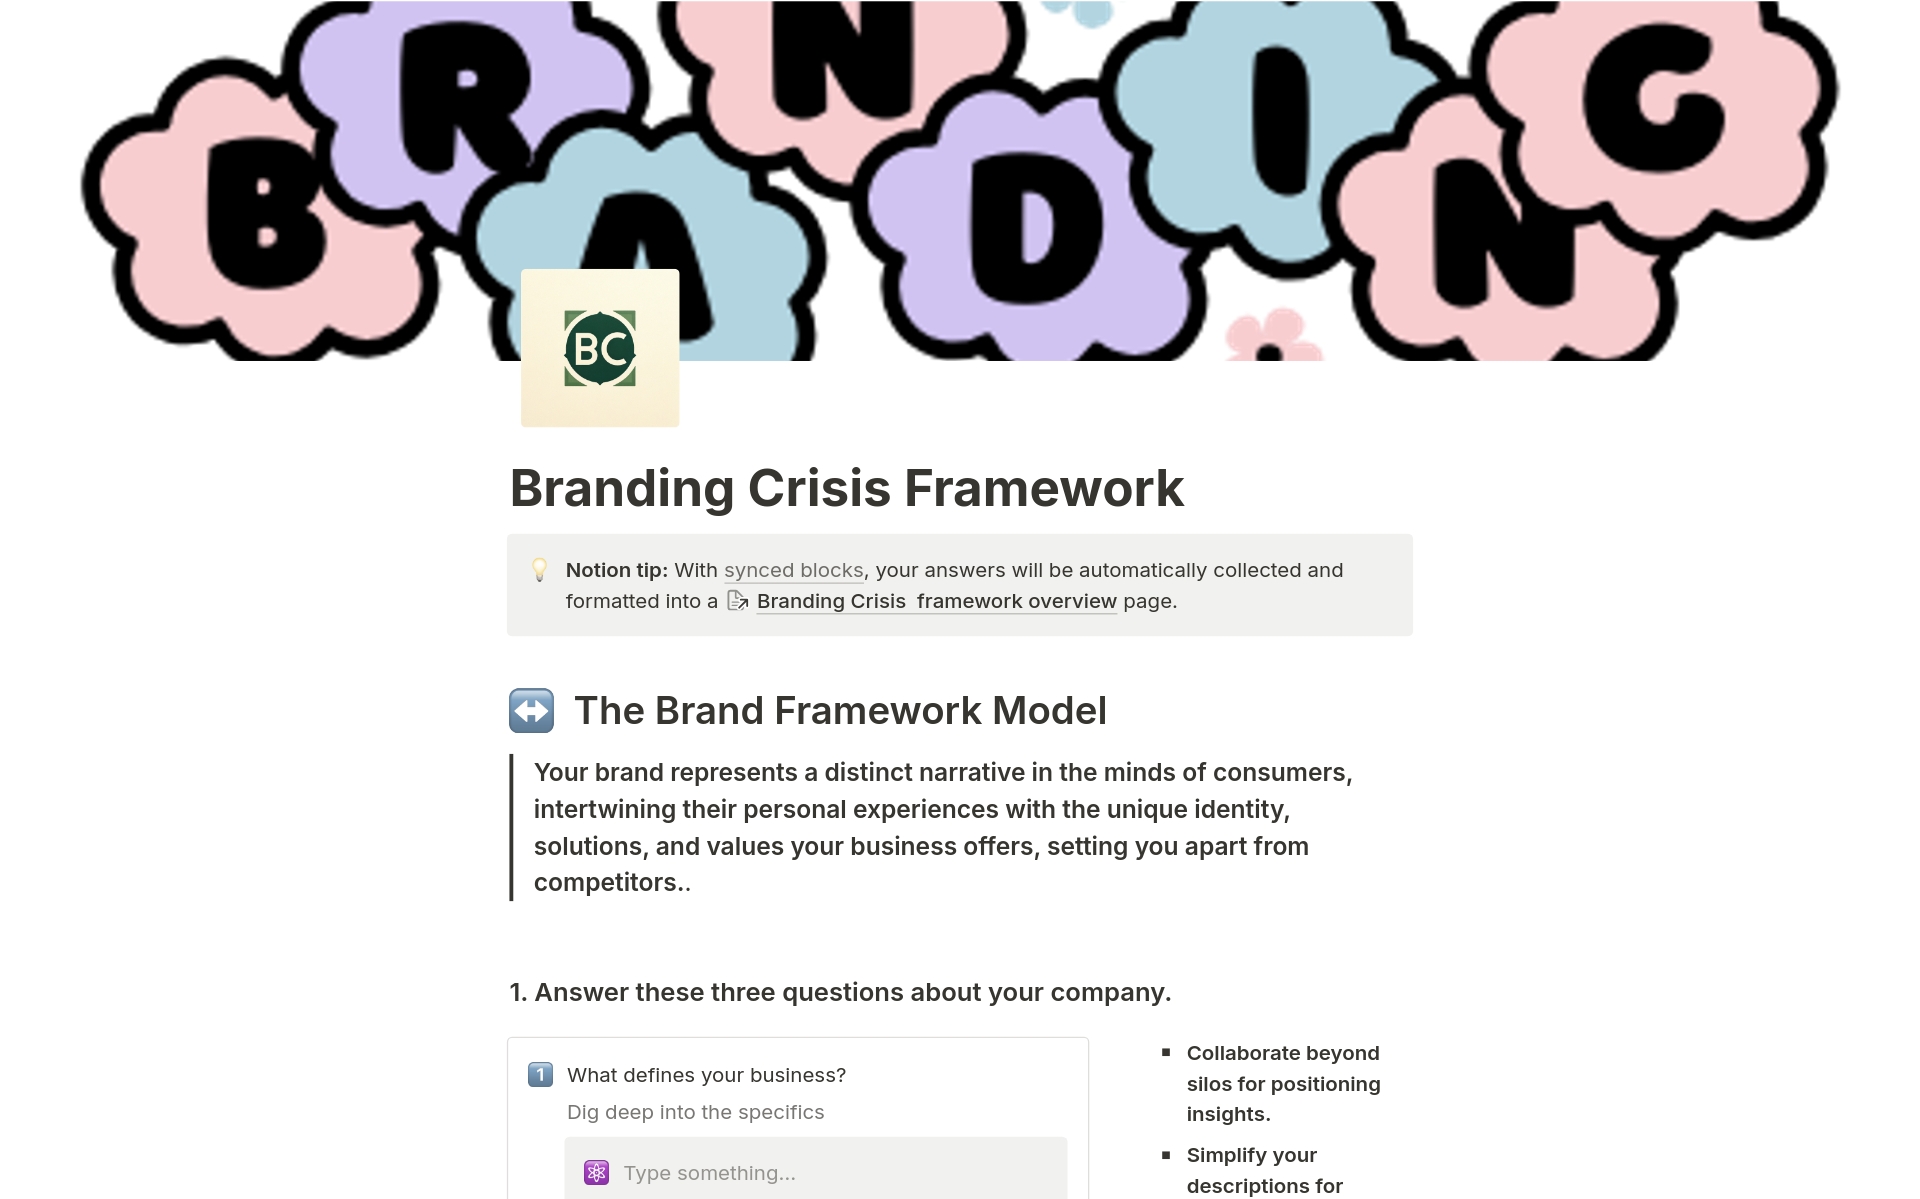 Branding Crisis Framework encompasses a series of structured exercises designed to help users articulate their brand’s core essence, differentiate their offering, and connect emotionally with their target audience.